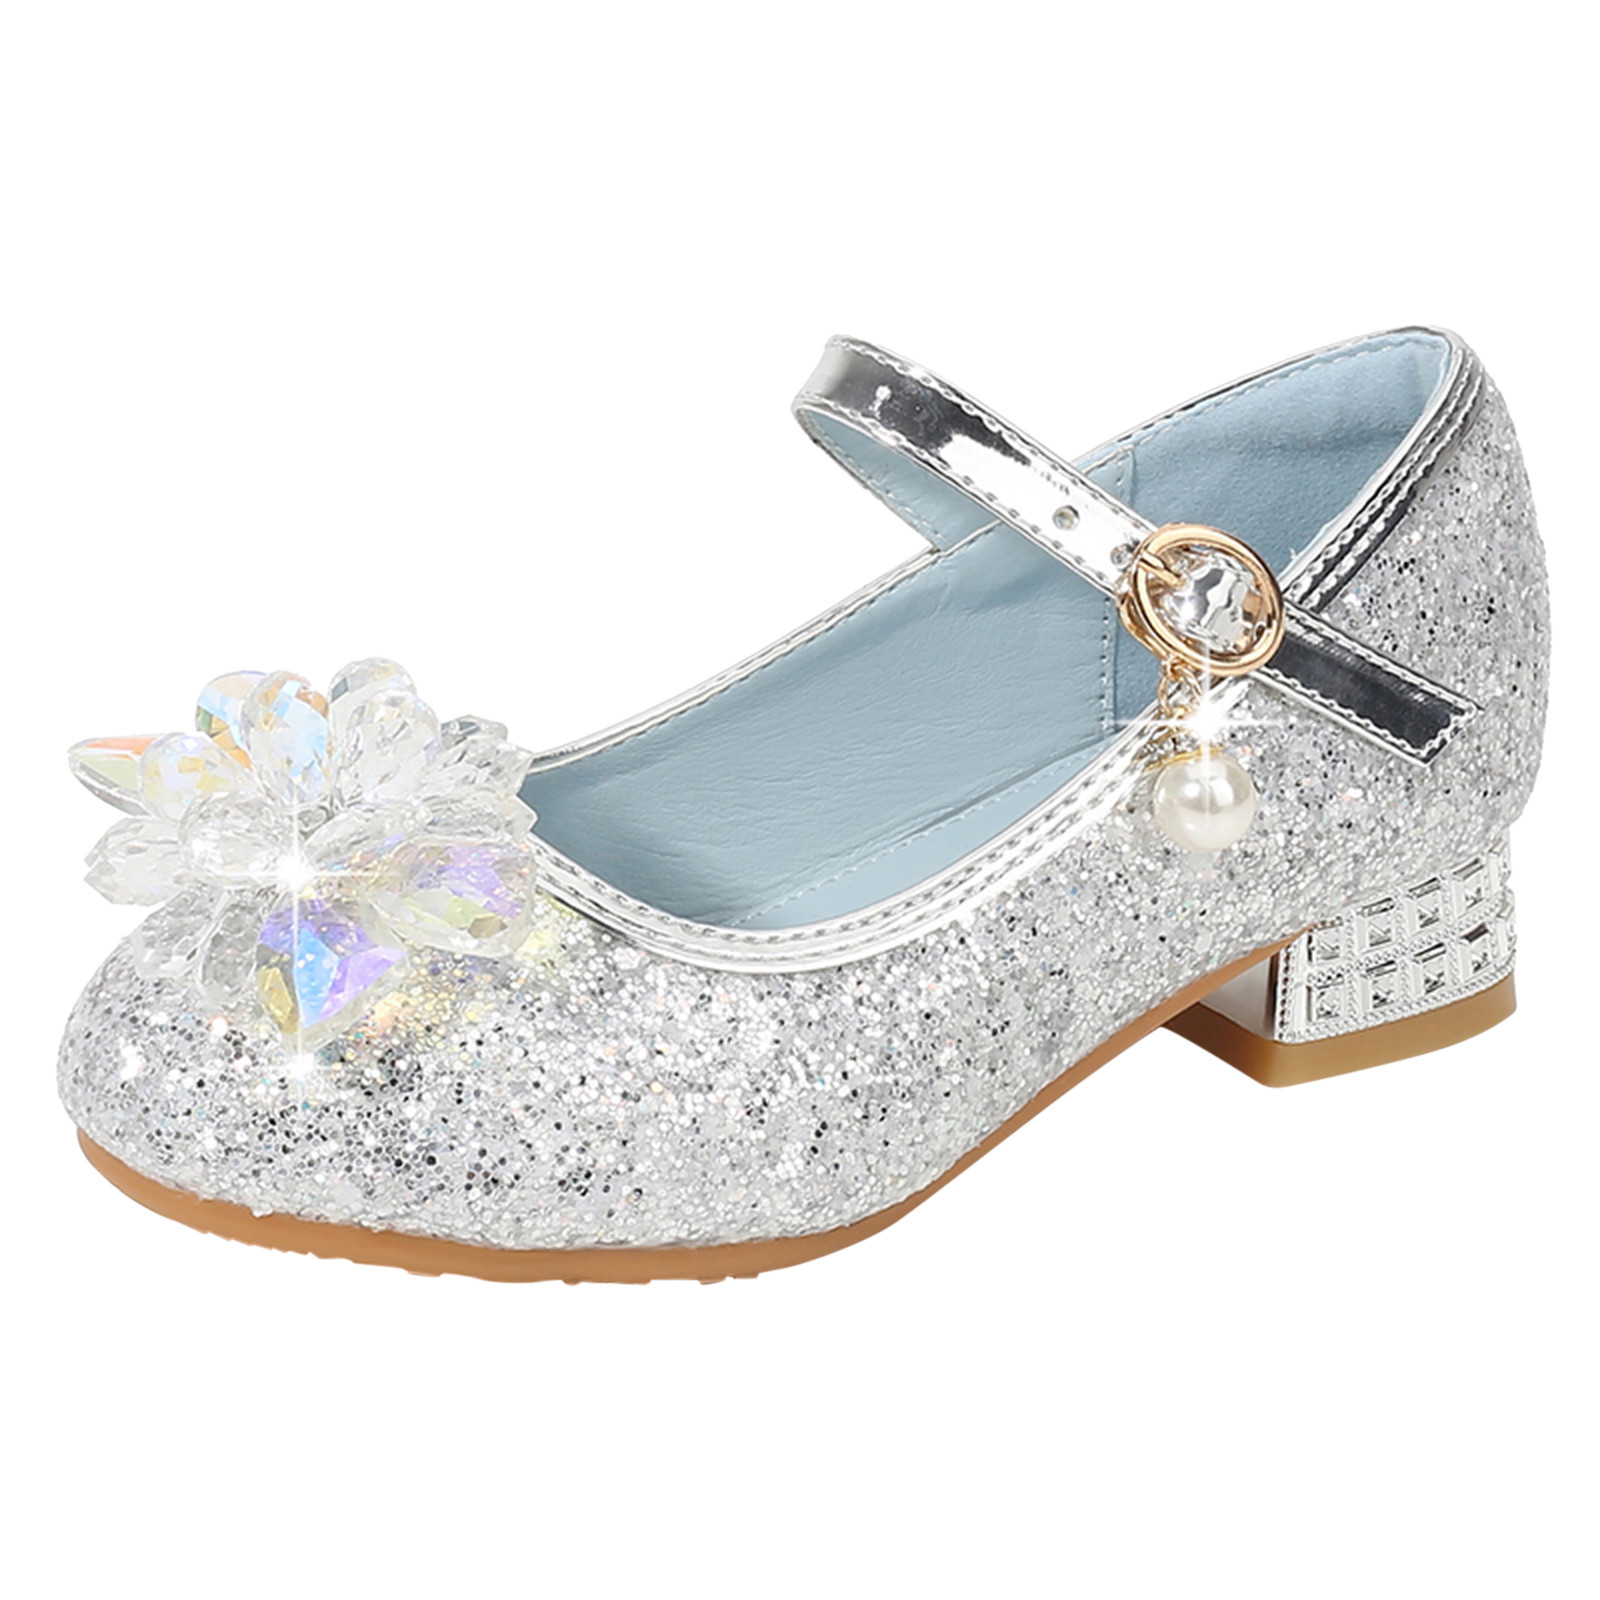 Youmylove Toddler Little Kid Girls Dress Pumps Glitter Sequins Princess Flower Low Heels Party Show Dance Shoes Rhinestone Sandals Children Casual Shoes - image 1 of 9